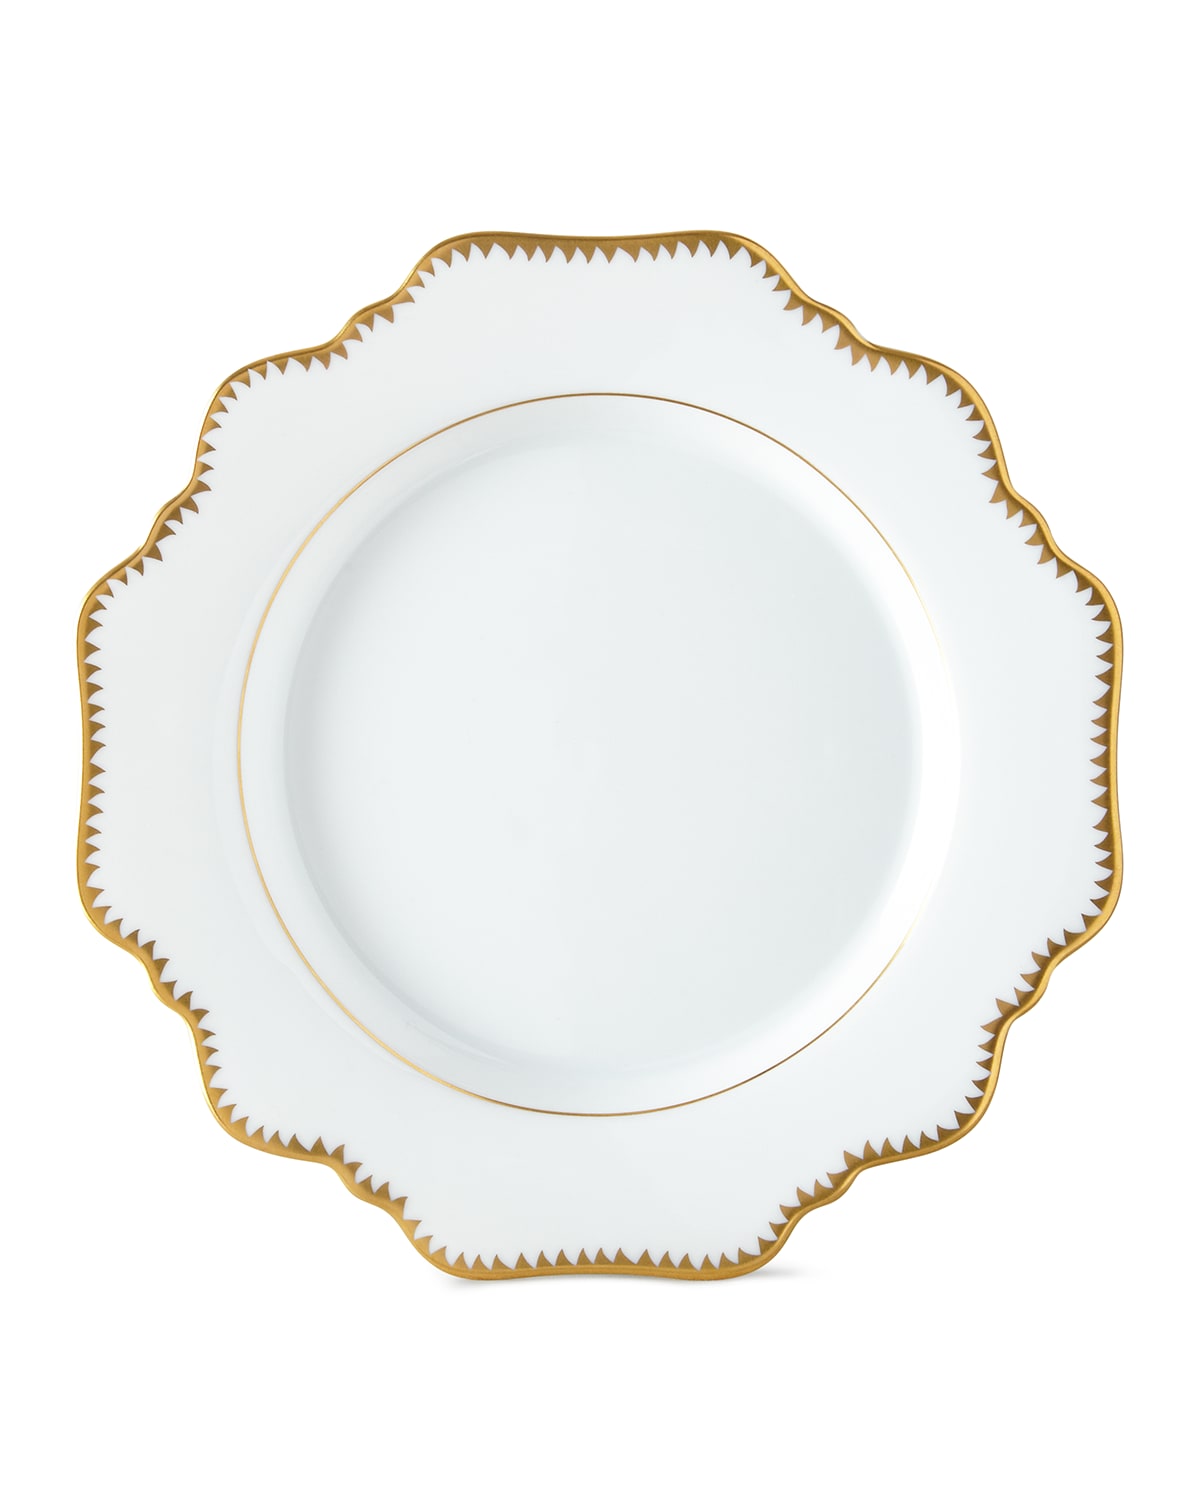 Simply Anna Antiqued Bread and Butter Plate